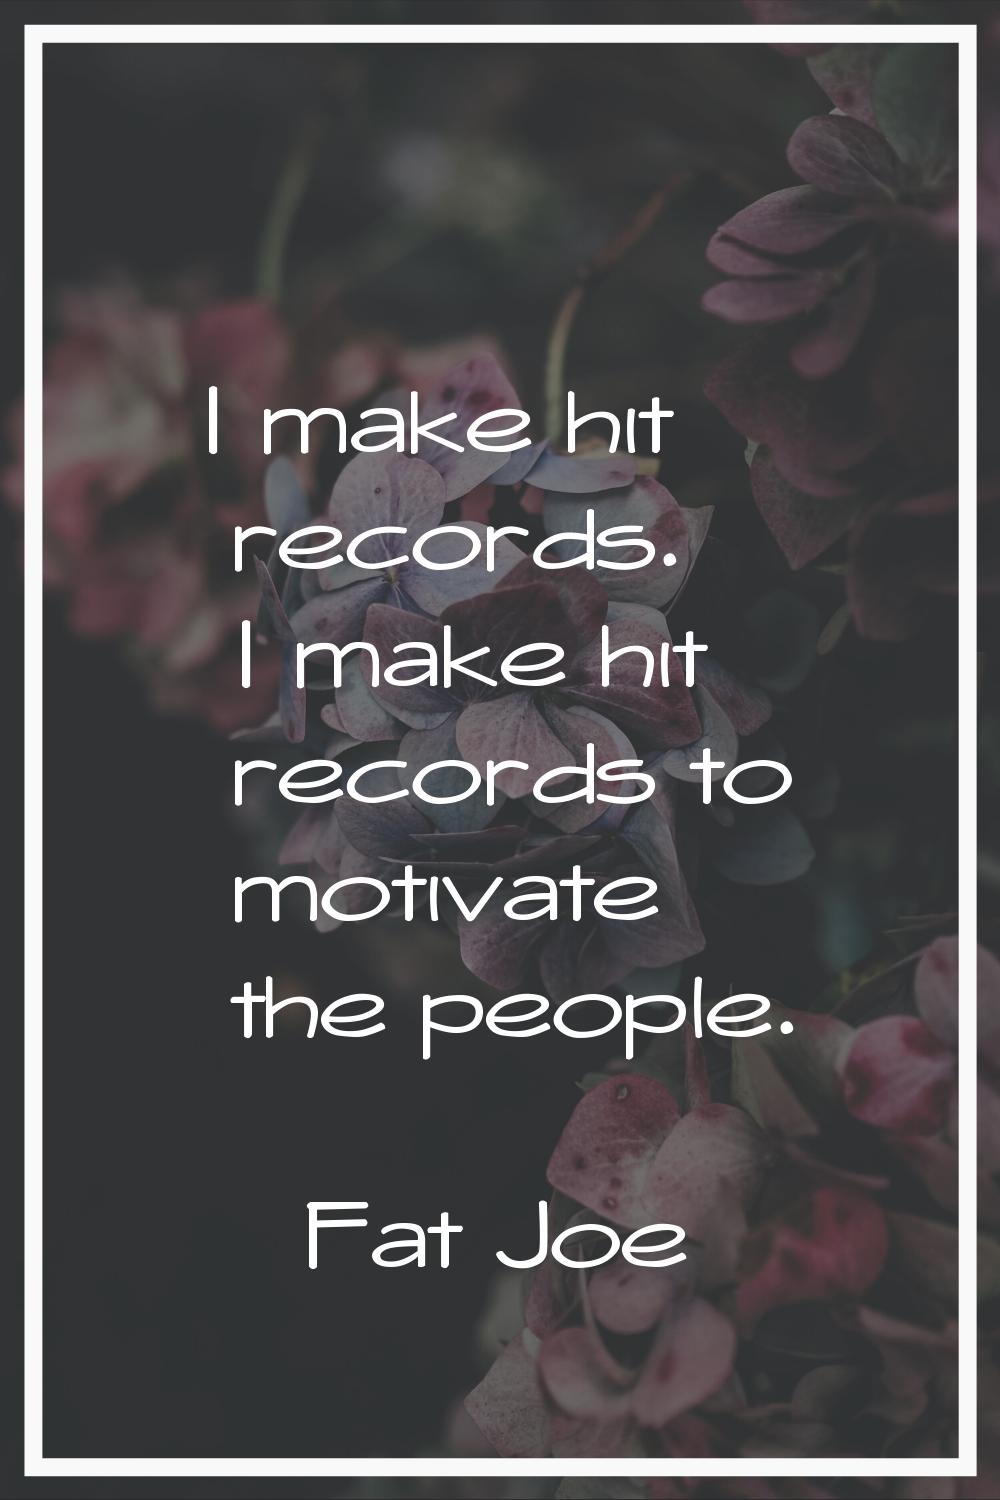 I make hit records. I make hit records to motivate the people.